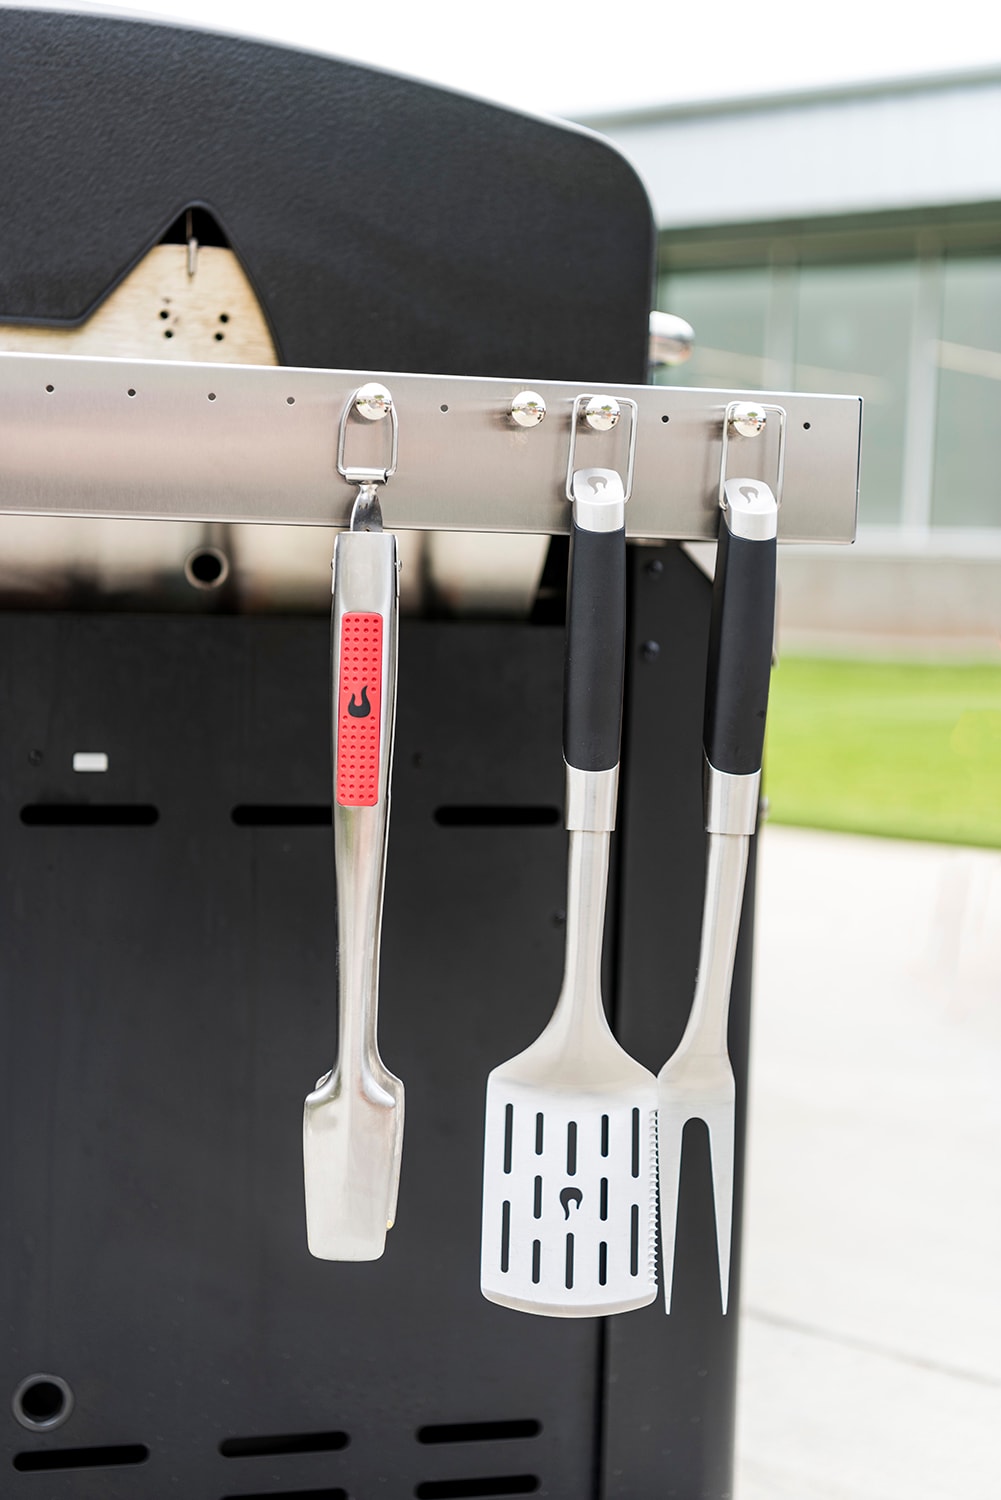 Grilling Tool Rest